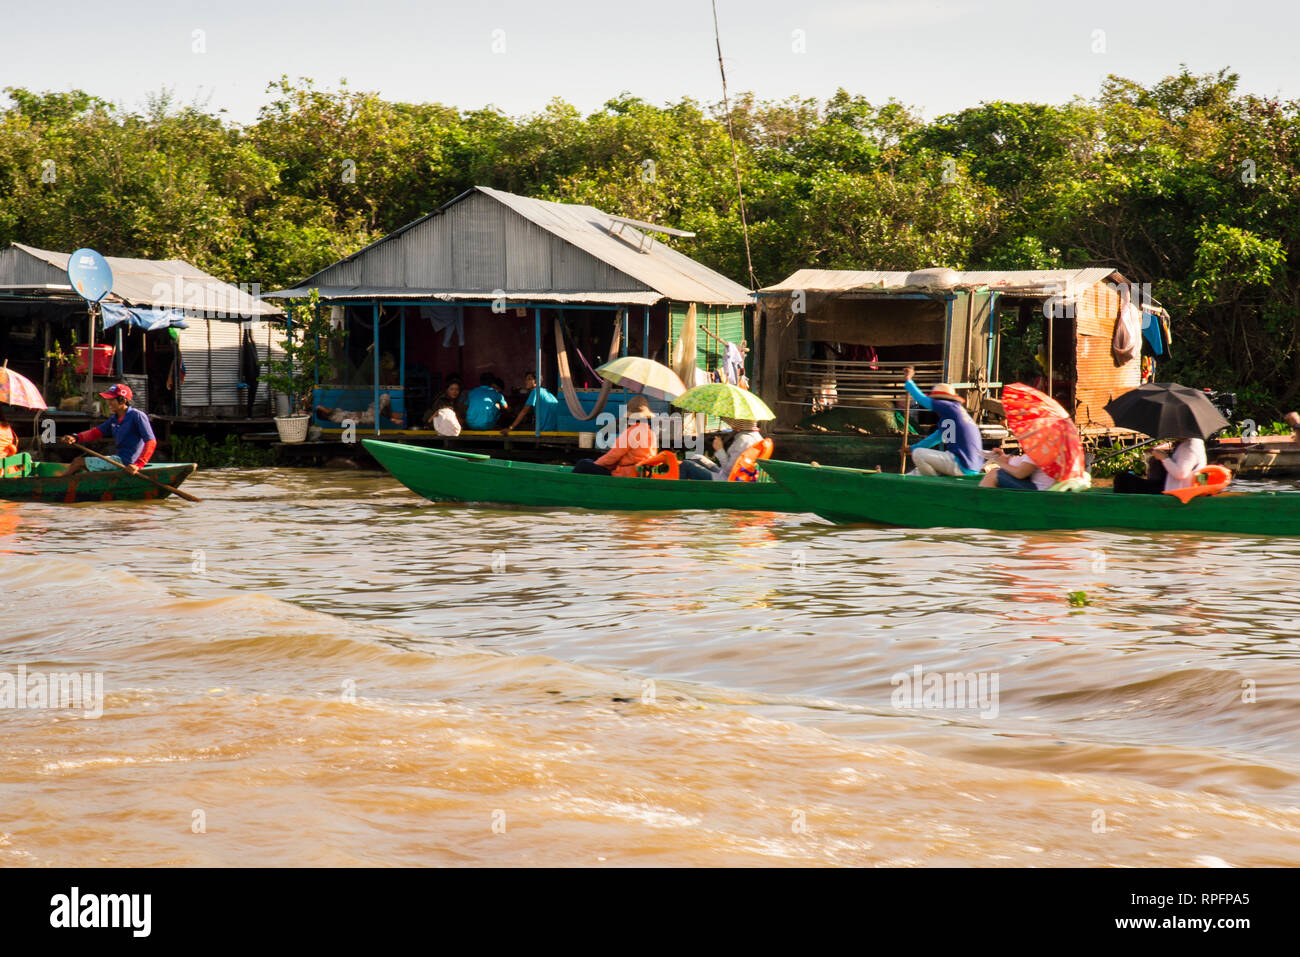 Tonle Sap Lake in Cambodia, home to thousands of Vietnamese Cambodians who are people without a country living off subsistence fishing. Stock Photo